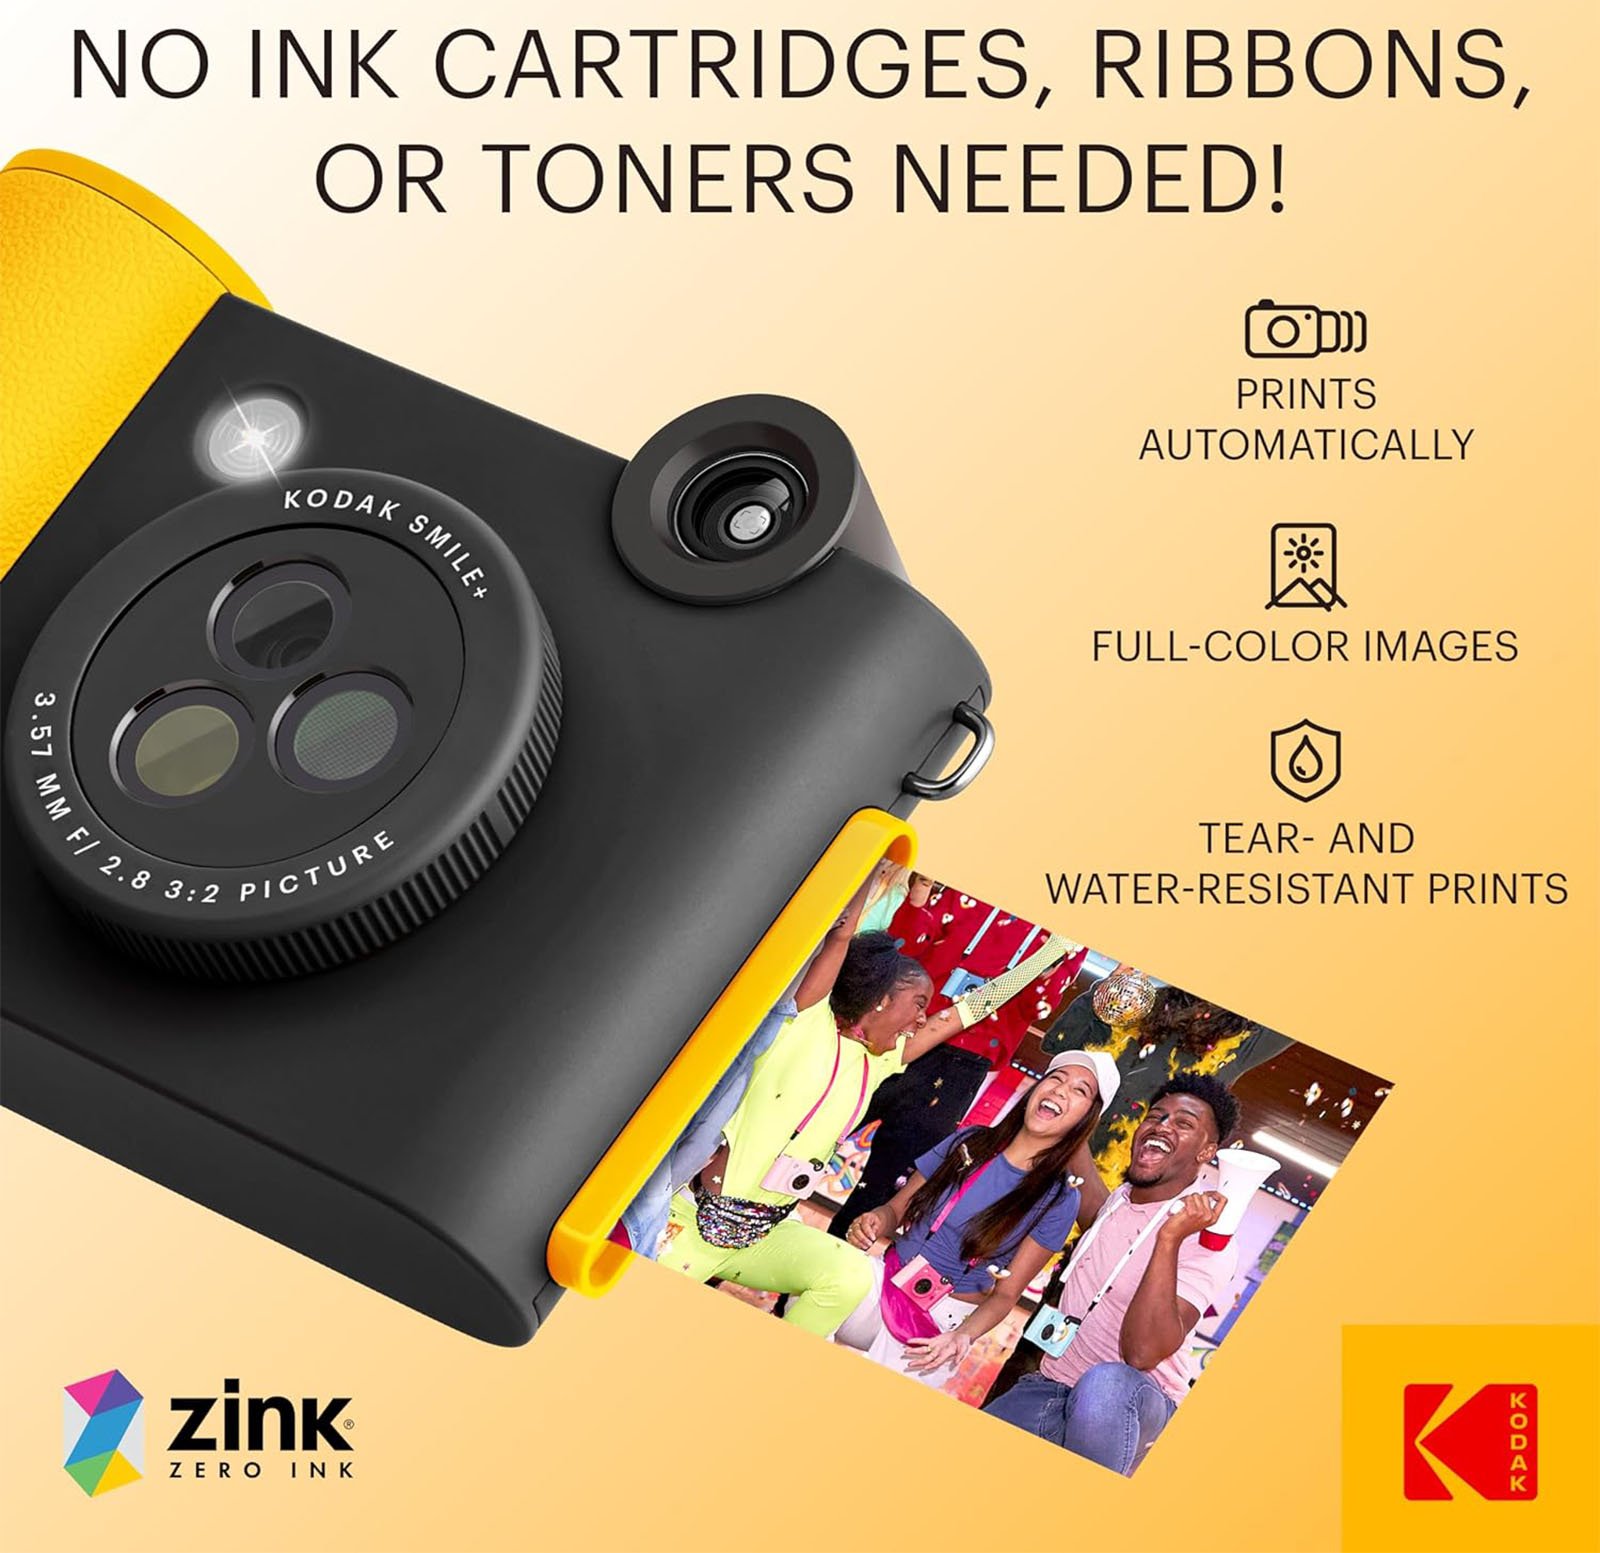 Advertisement for Kodak Smile camera with Zink printing technology, highlighting that no ink cartridges, ribbons, or toners are needed, and it prints automatically full-color, tear- and water-resistant images.